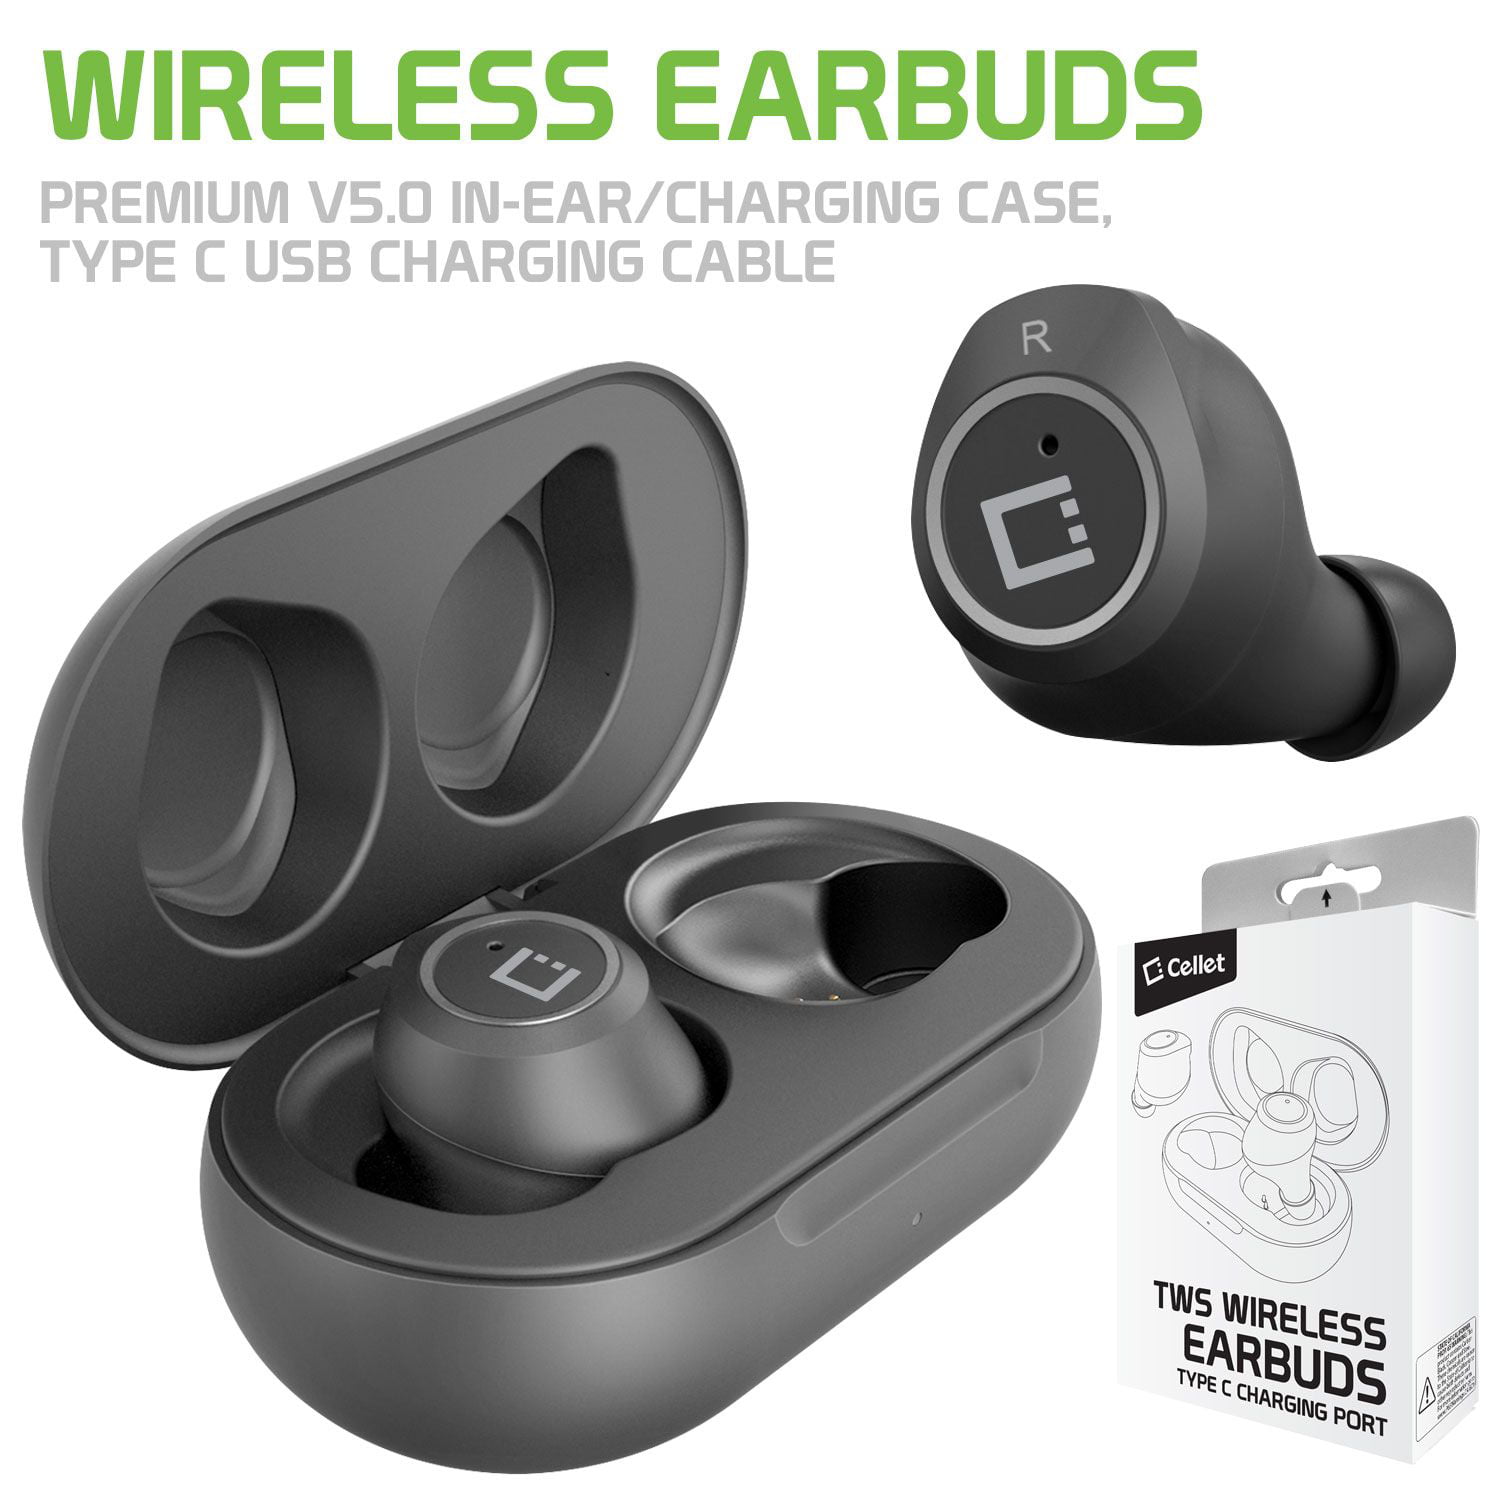 Auriculares inalambricos NEWEST A13 TWS bluetooth táctil earbuds